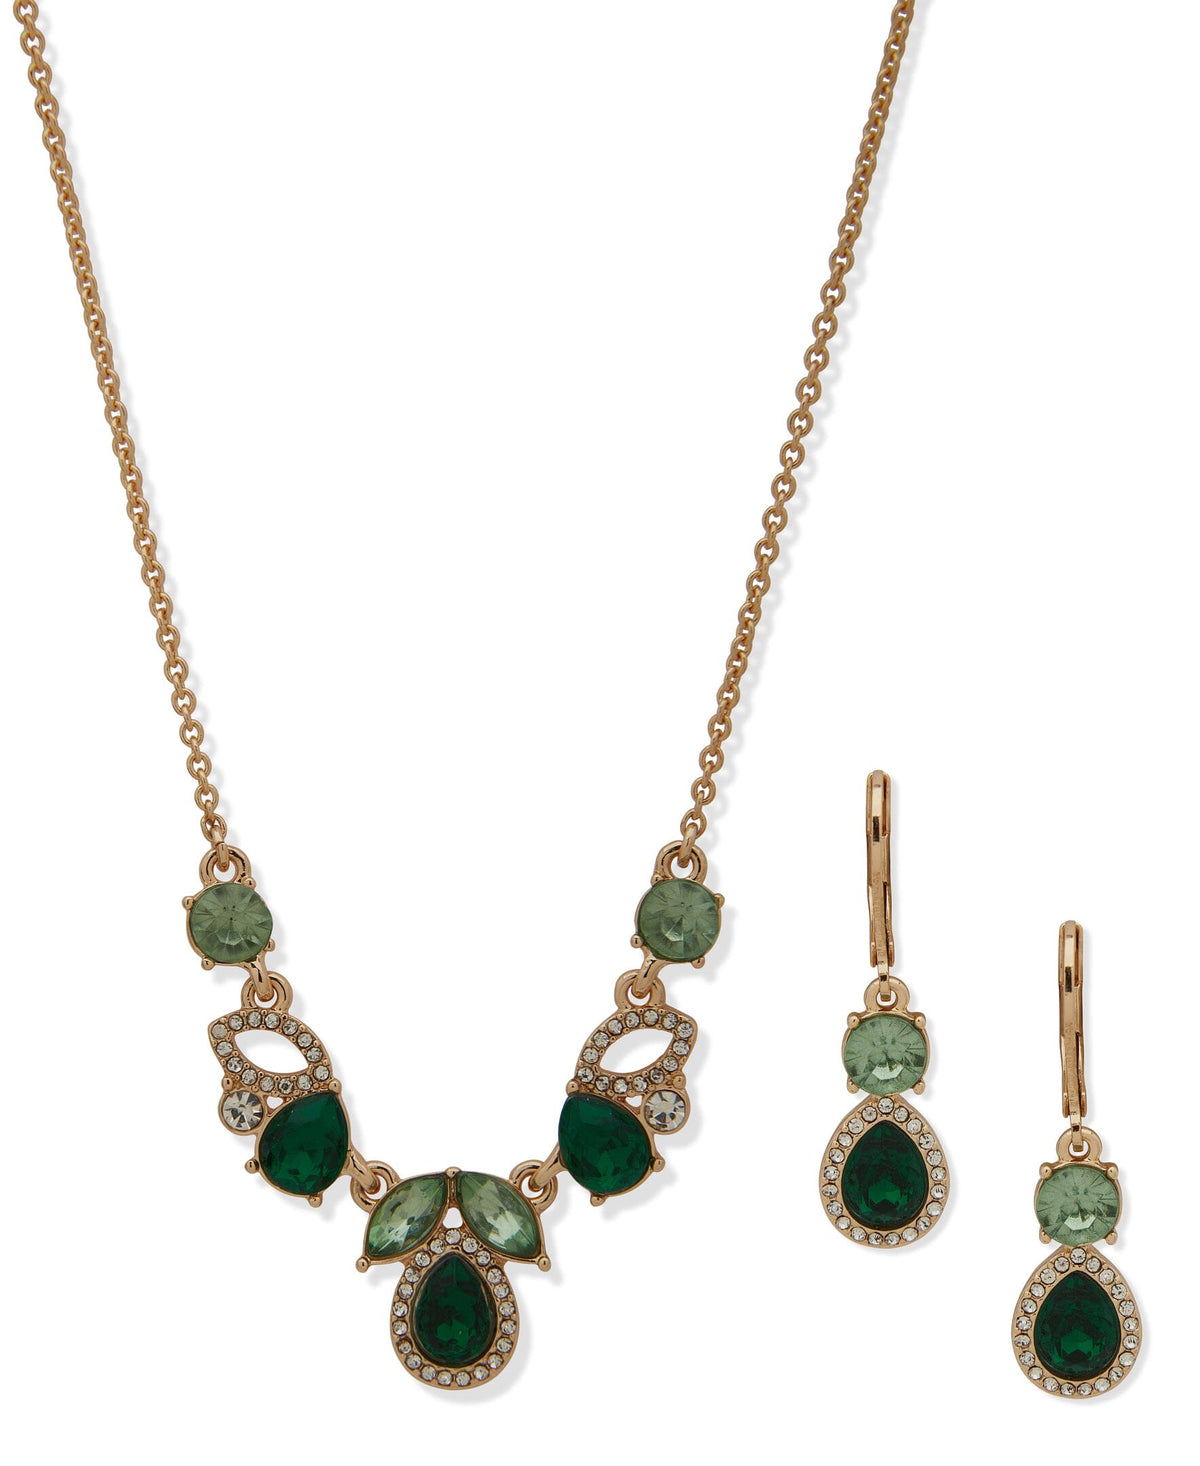 Anne Klein Gold Tone Green Stone Necklace and Earring Set